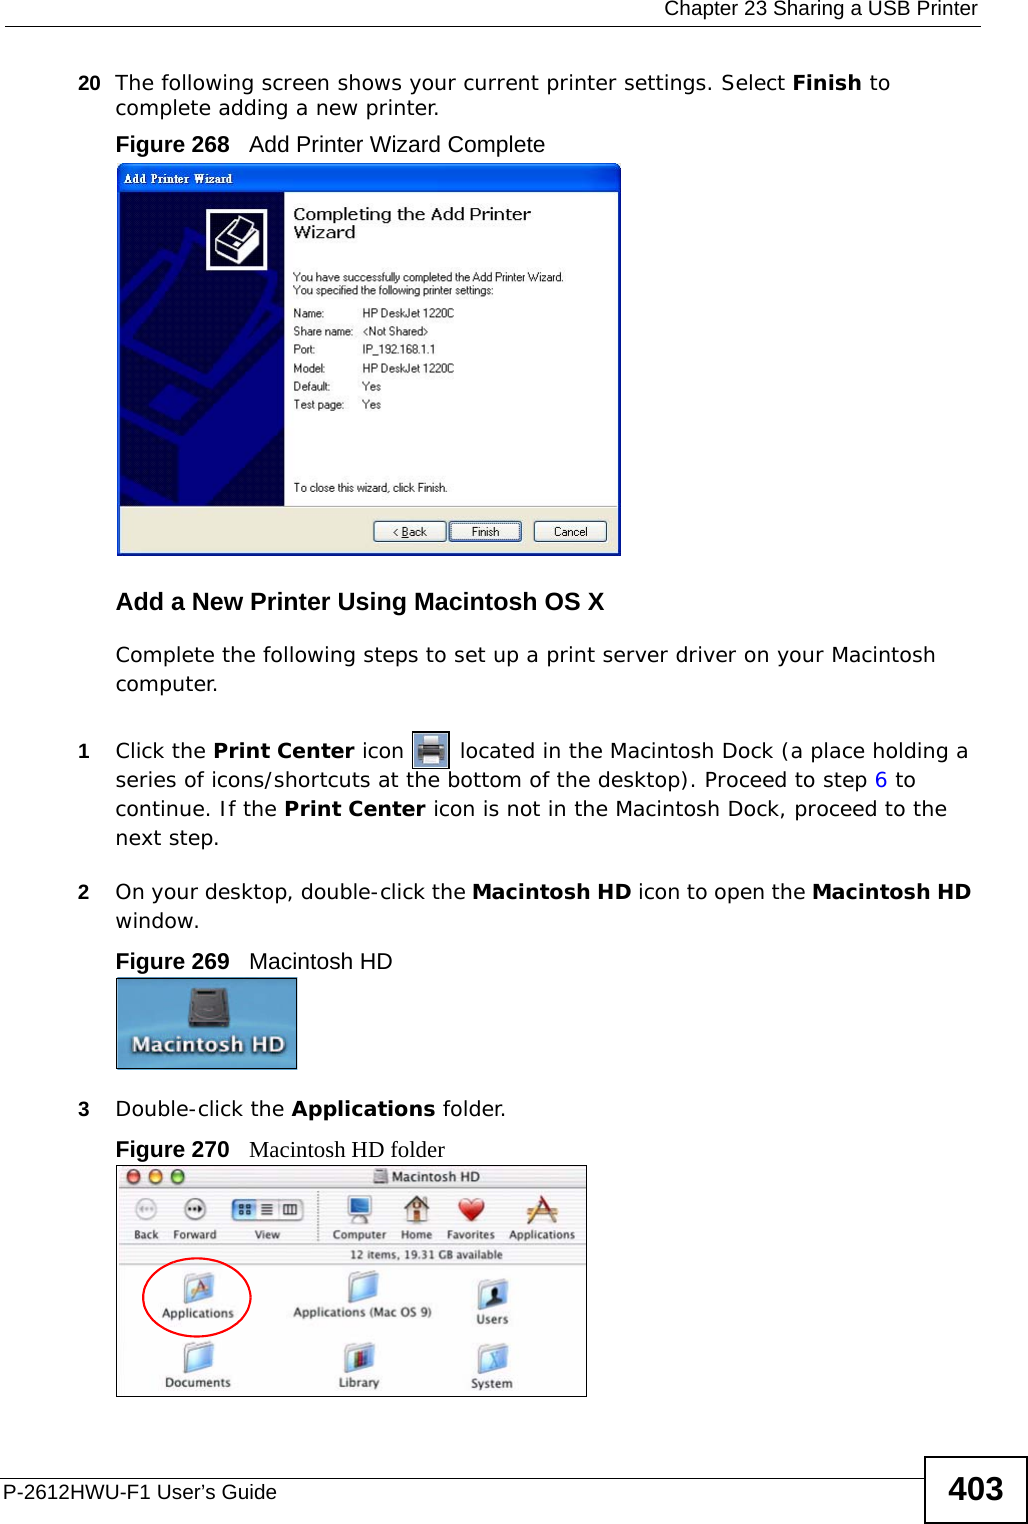  Chapter 23 Sharing a USB PrinterP-2612HWU-F1 User’s Guide 40320 The following screen shows your current printer settings. Select Finish to complete adding a new printer.Figure 268   Add Printer Wizard CompleteAdd a New Printer Using Macintosh OS XComplete the following steps to set up a print server driver on your Macintosh computer.1Click the Print Center icon   located in the Macintosh Dock (a place holding a series of icons/shortcuts at the bottom of the desktop). Proceed to step 6 to continue. If the Print Center icon is not in the Macintosh Dock, proceed to the next step.2On your desktop, double-click the Macintosh HD icon to open the Macintosh HD window.Figure 269   Macintosh HD3Double-click the Applications folder.   Figure 270   Macintosh HD folder